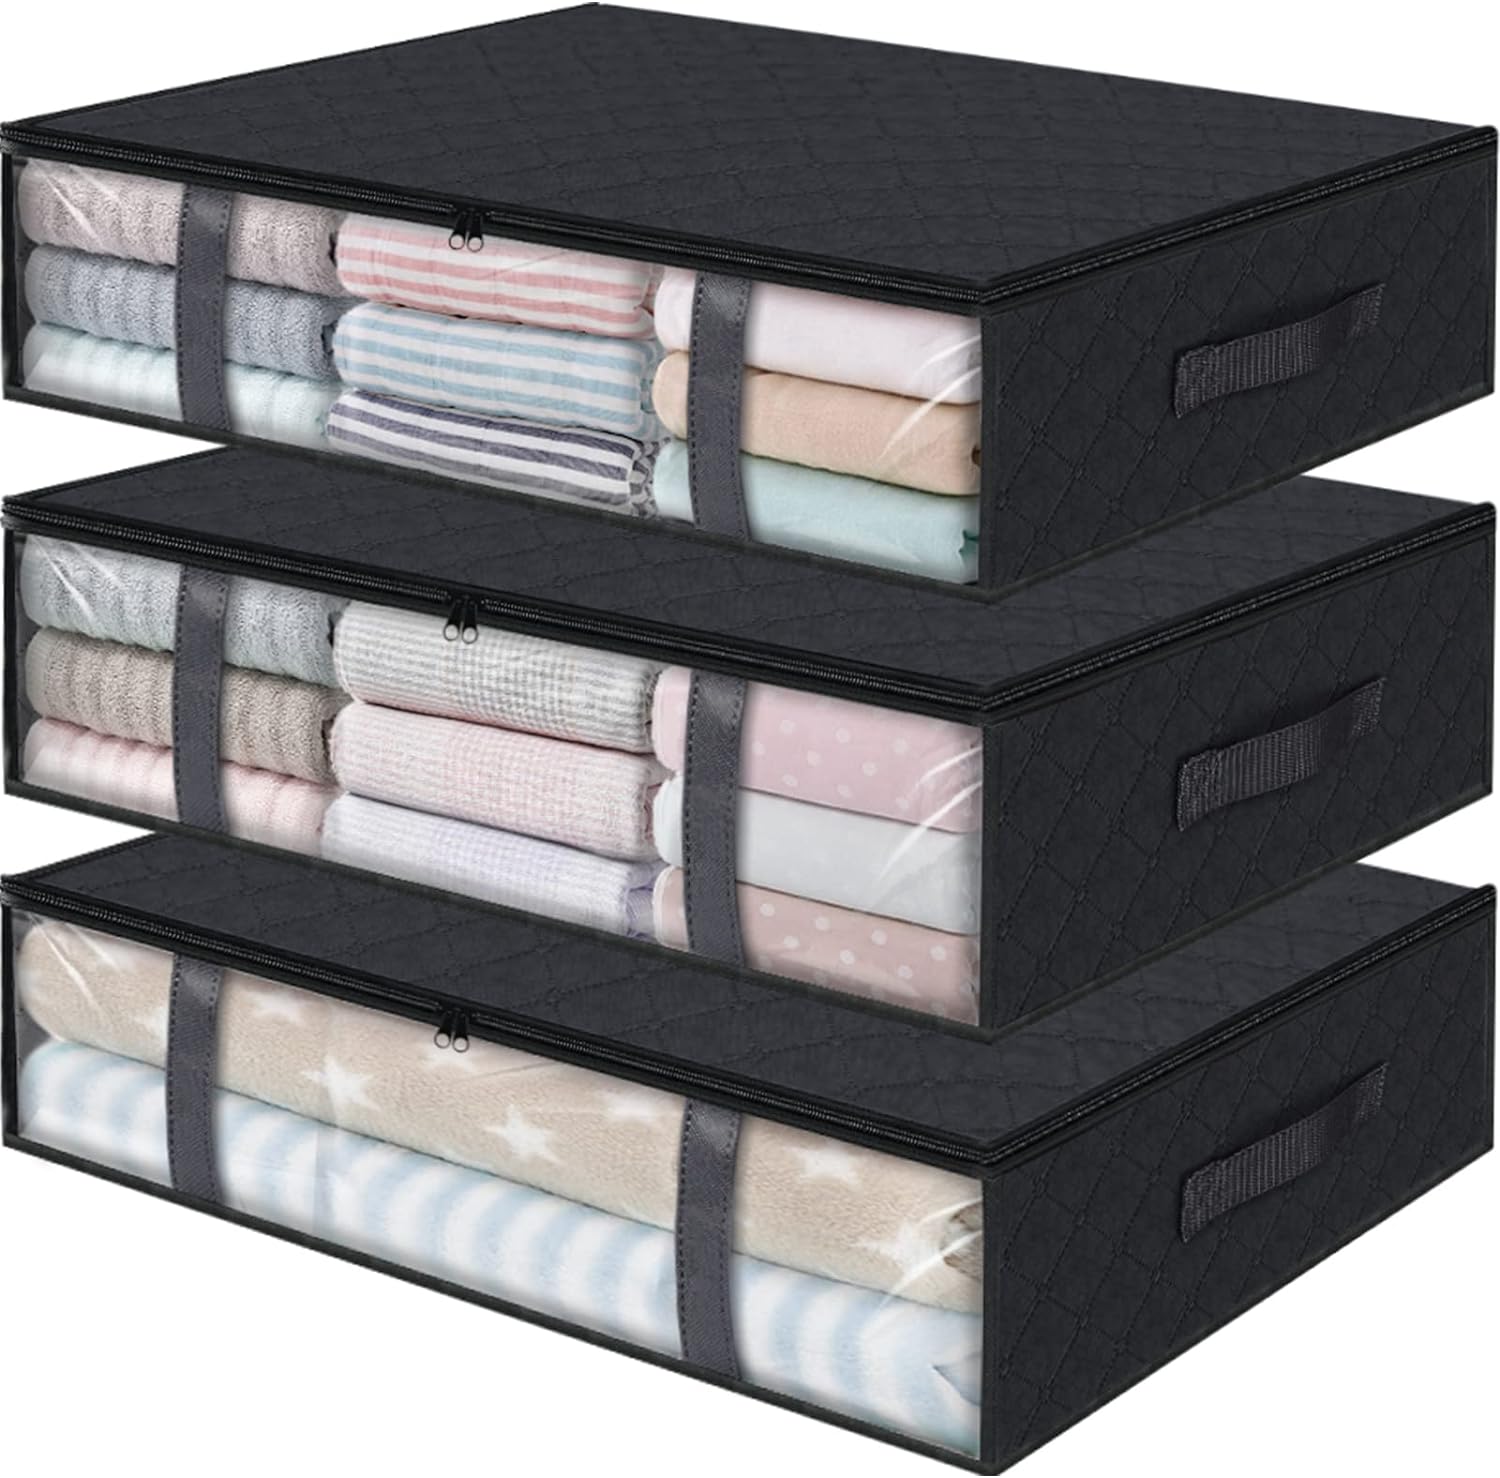 StorageRight Storage Bins Clothes Storage, Foldable Blanket Storage Bags, Under Bed Storage Containers for Organizing, Clothing, Bedroom, Comforter, Closet, Dorm, Quilts, Organizer, 3-Pack Black